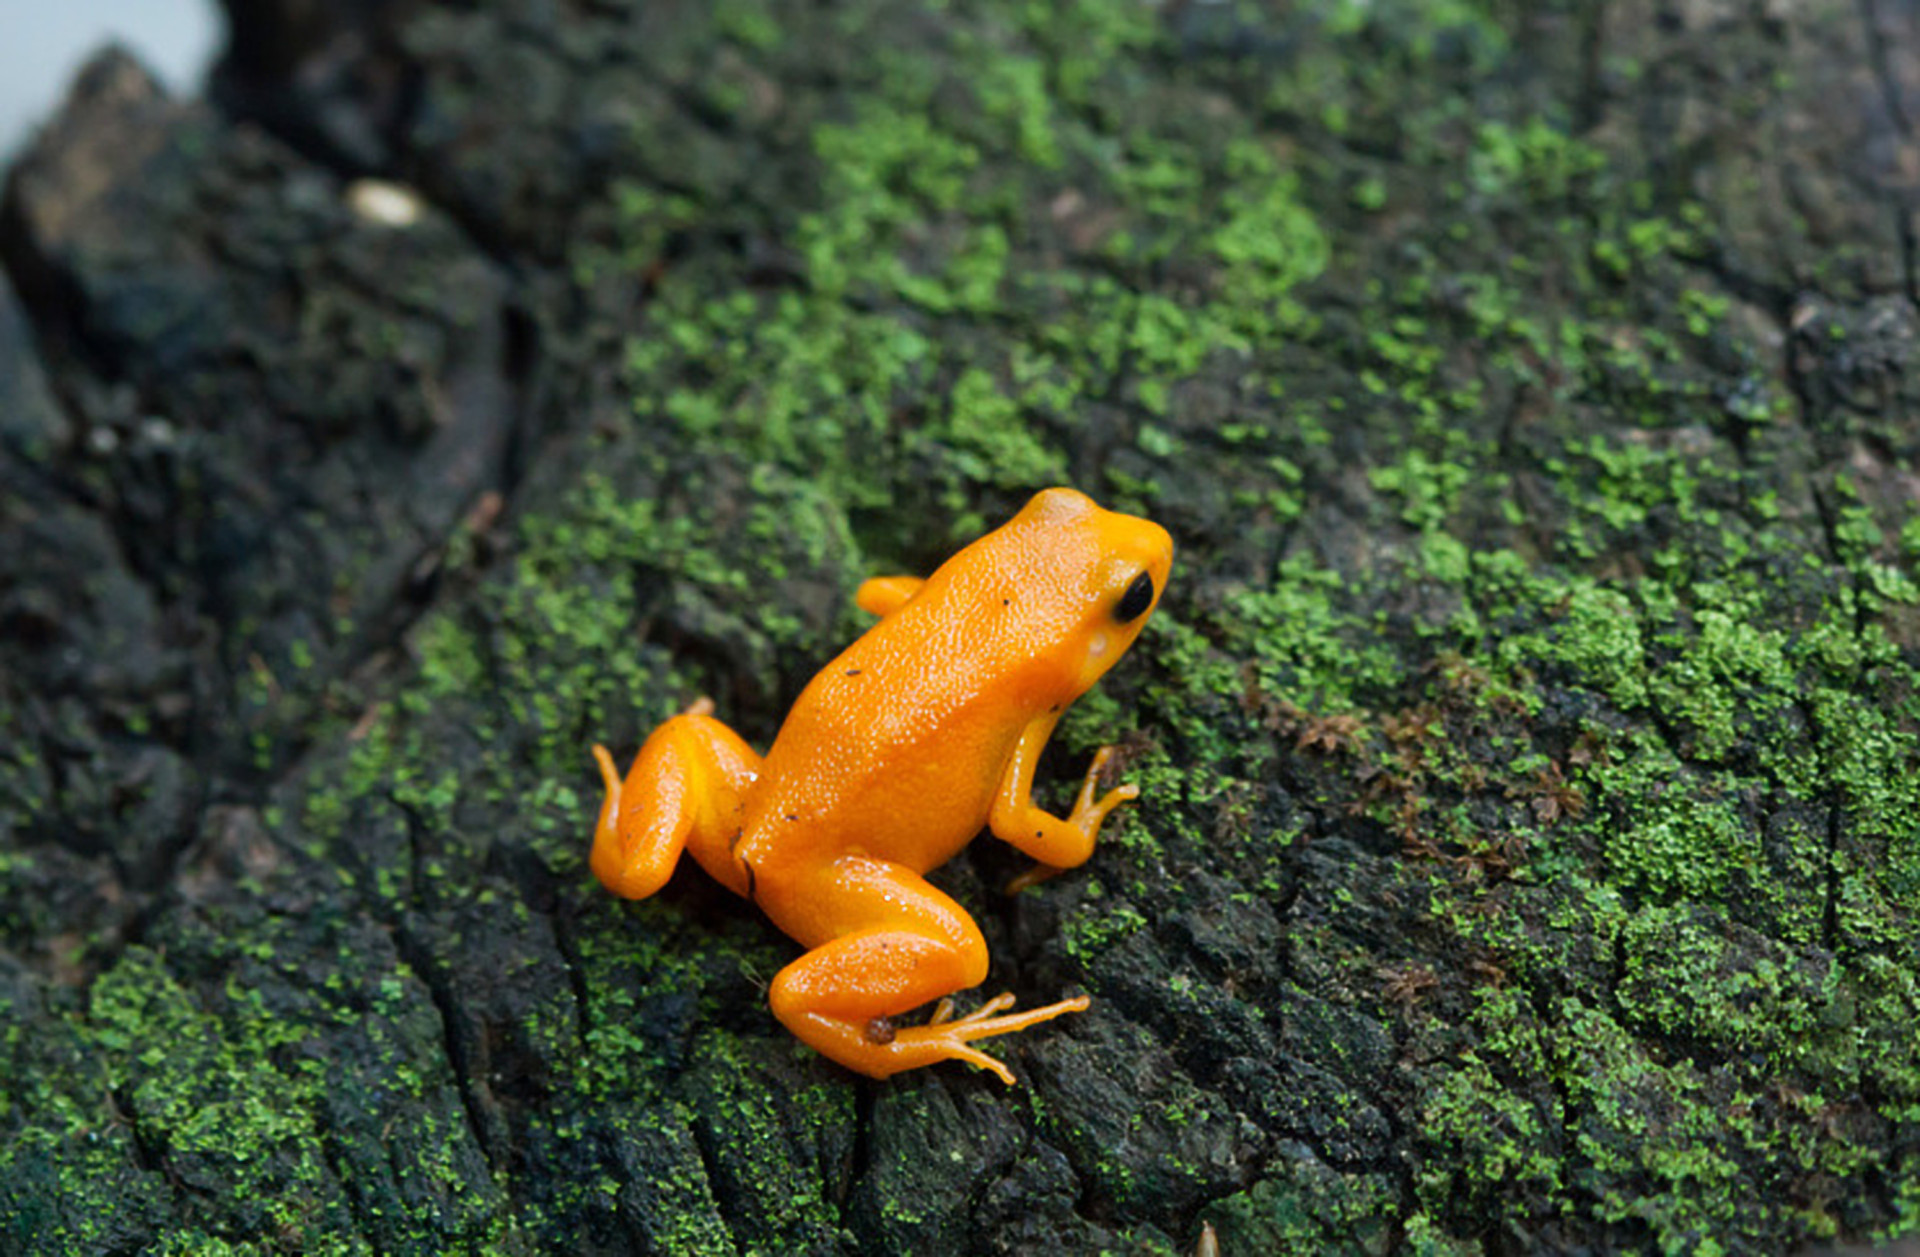 One of Madagascar's most threatened amphibian species, this attractive frog is poisonous. Admire it from a distance.<p><a href="https://www.msn.com/en-us/community/channel/vid-7xx8mnucu55yw63we9va2gwr7uihbxwc68fxqp25x6tg4ftibpra?cvid=94631541bc0f4f89bfd59158d696ad7e">Follow us and access great exclusive content every day</a></p>